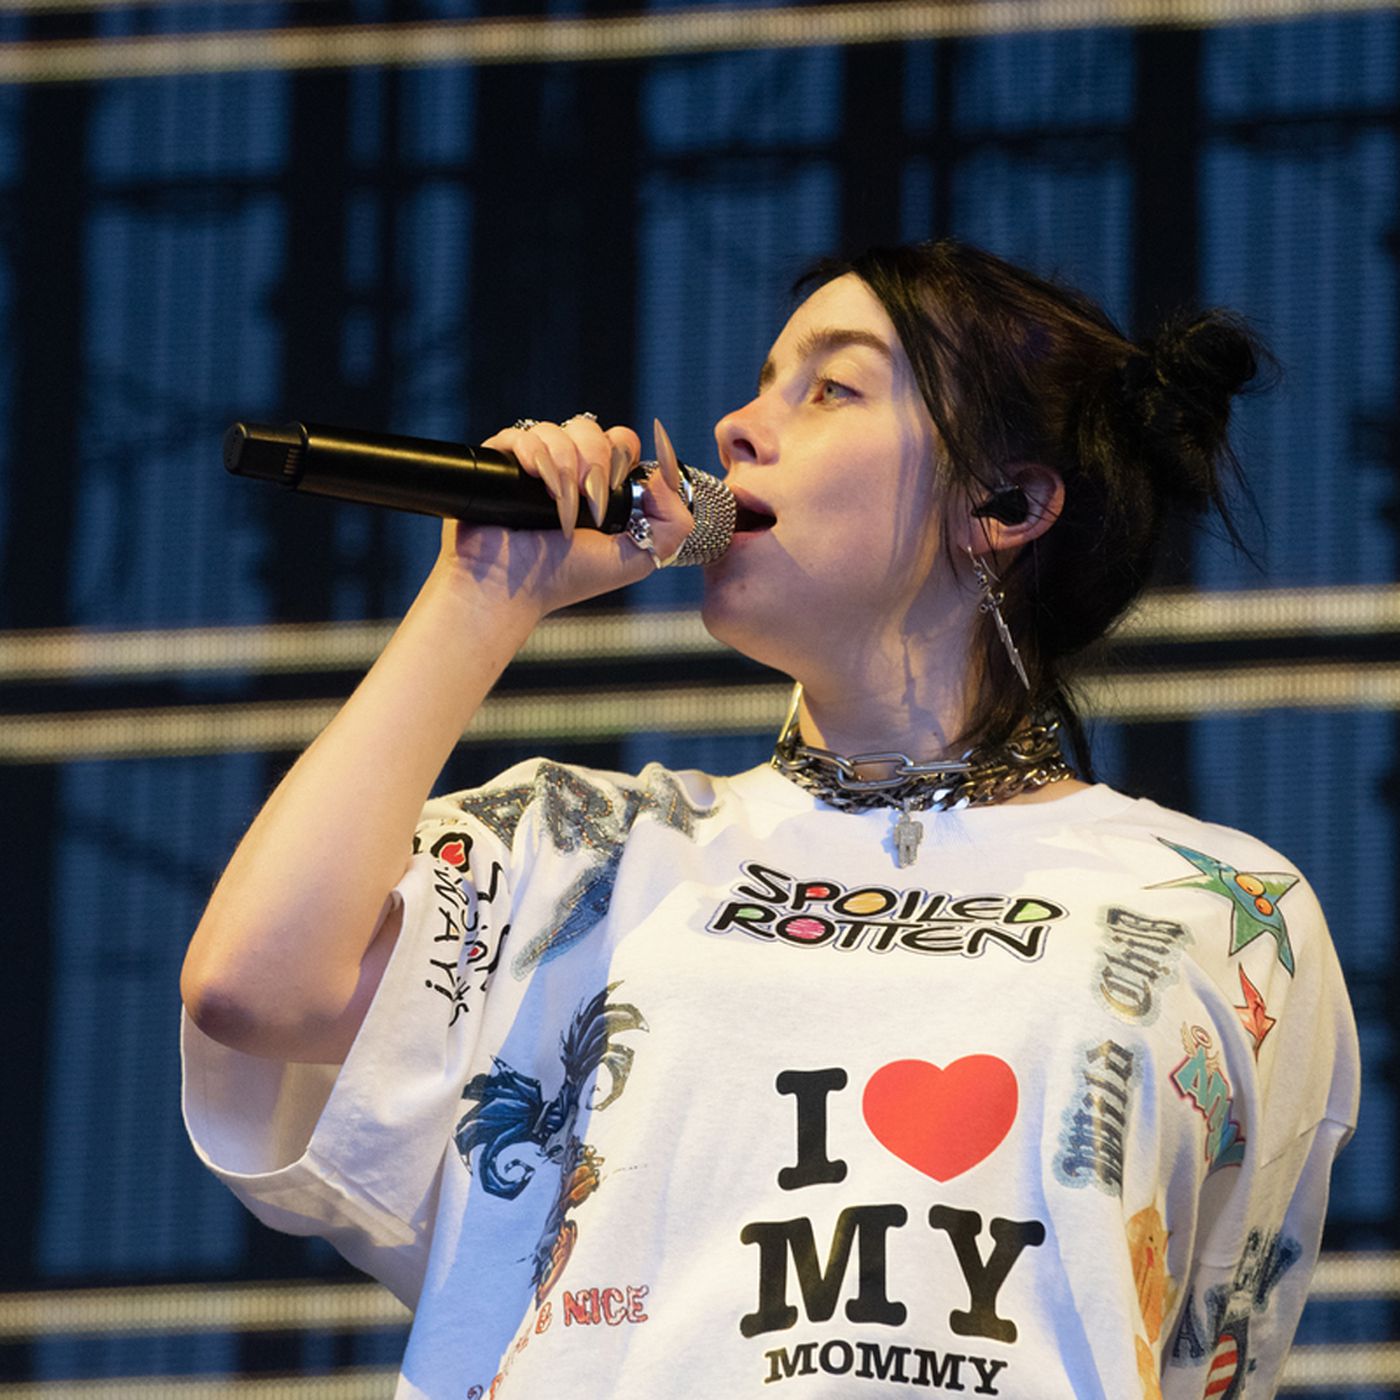 Billie eilish nude magazine cover Billie Eilish Lashes Out At Nylon Germany Over Nude Cover Chicago Sun Times